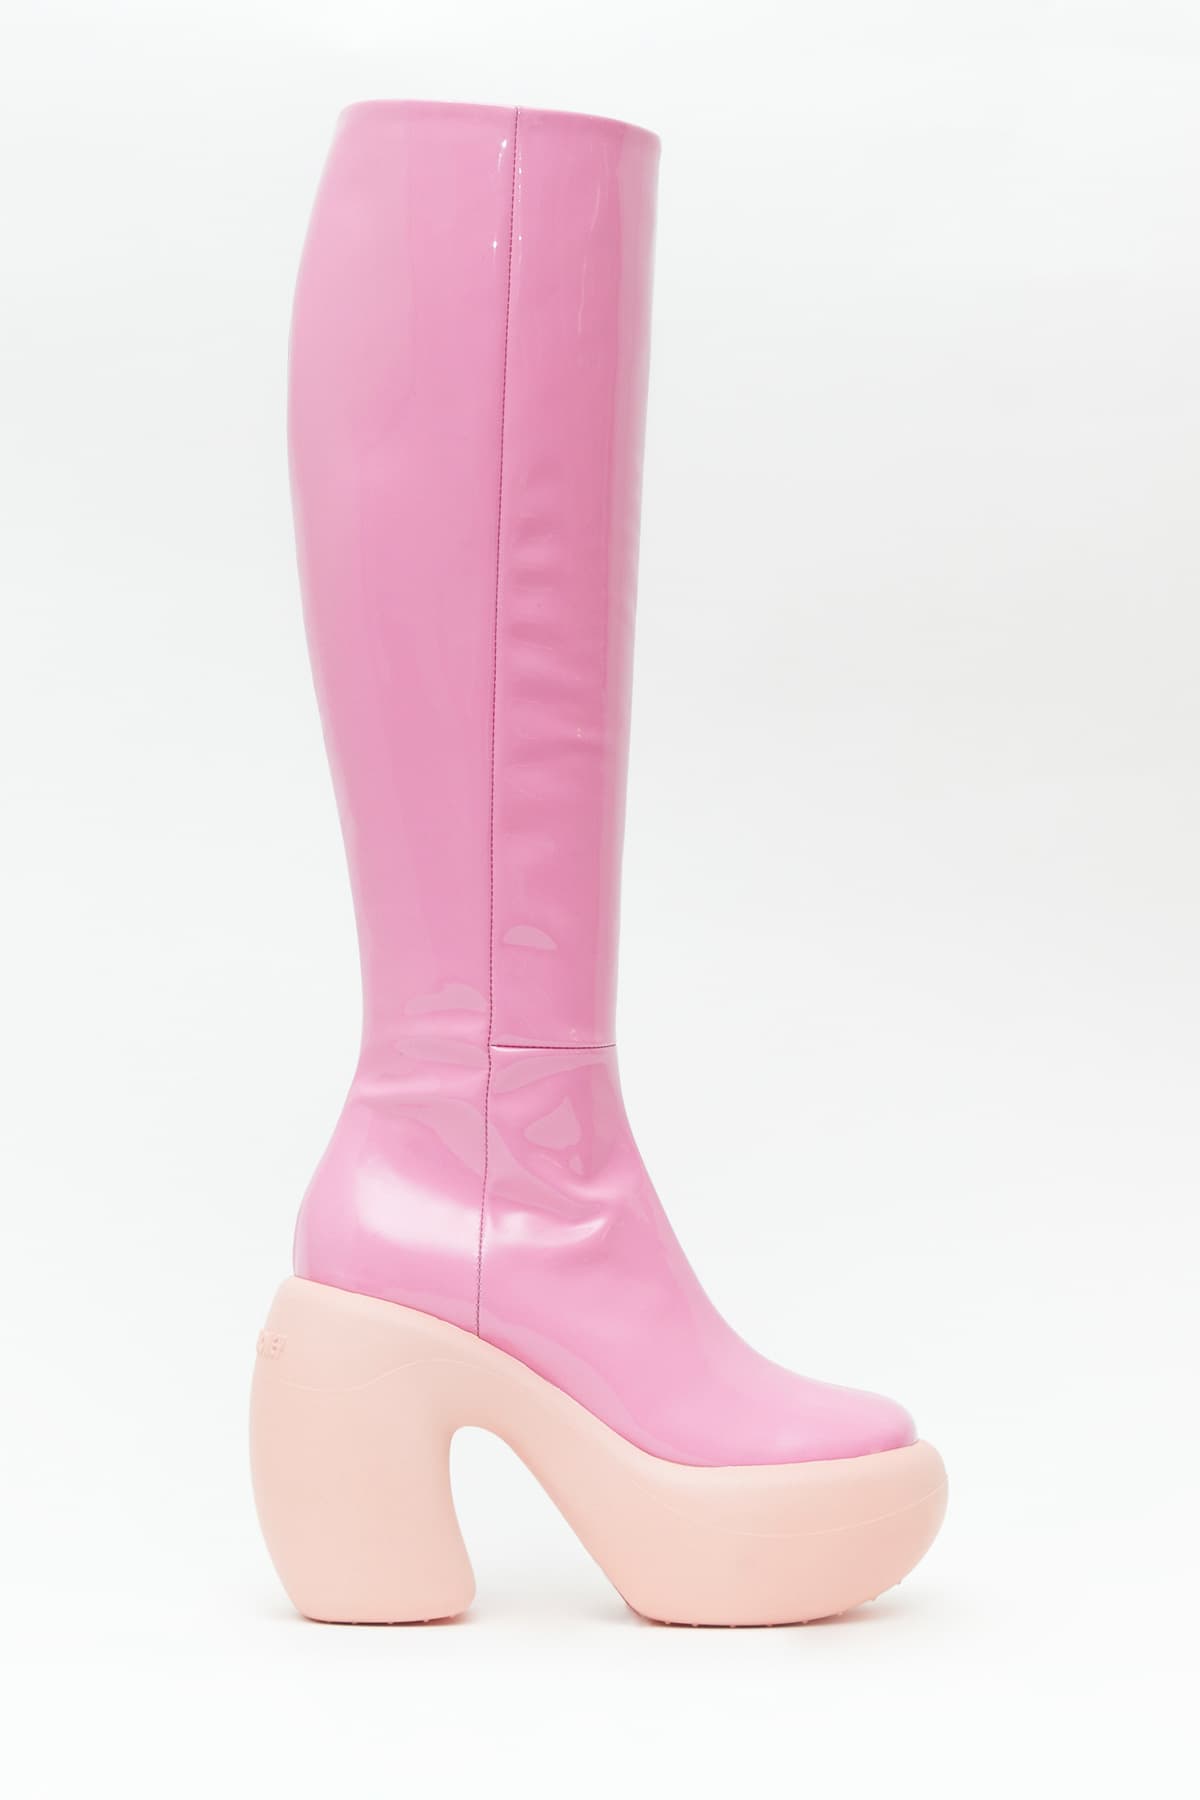 Sideview of Honey Bubble Boot in pink from the Haus of Honey fall-winter 2023-24